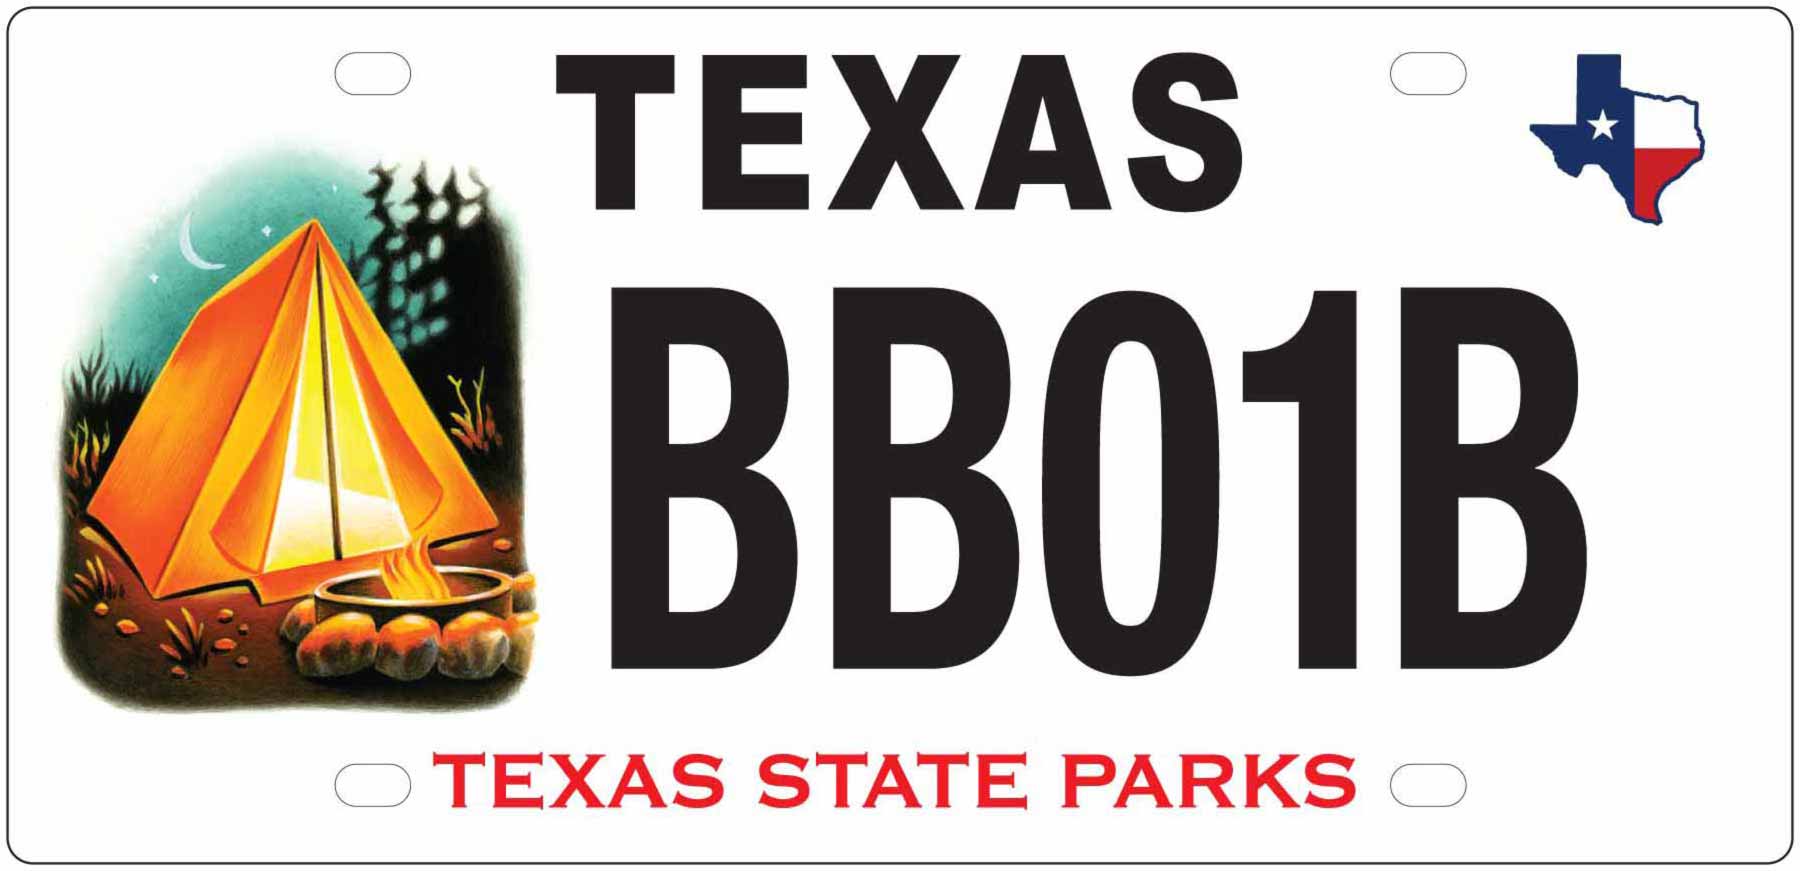 Texas State Park Camping License Plate